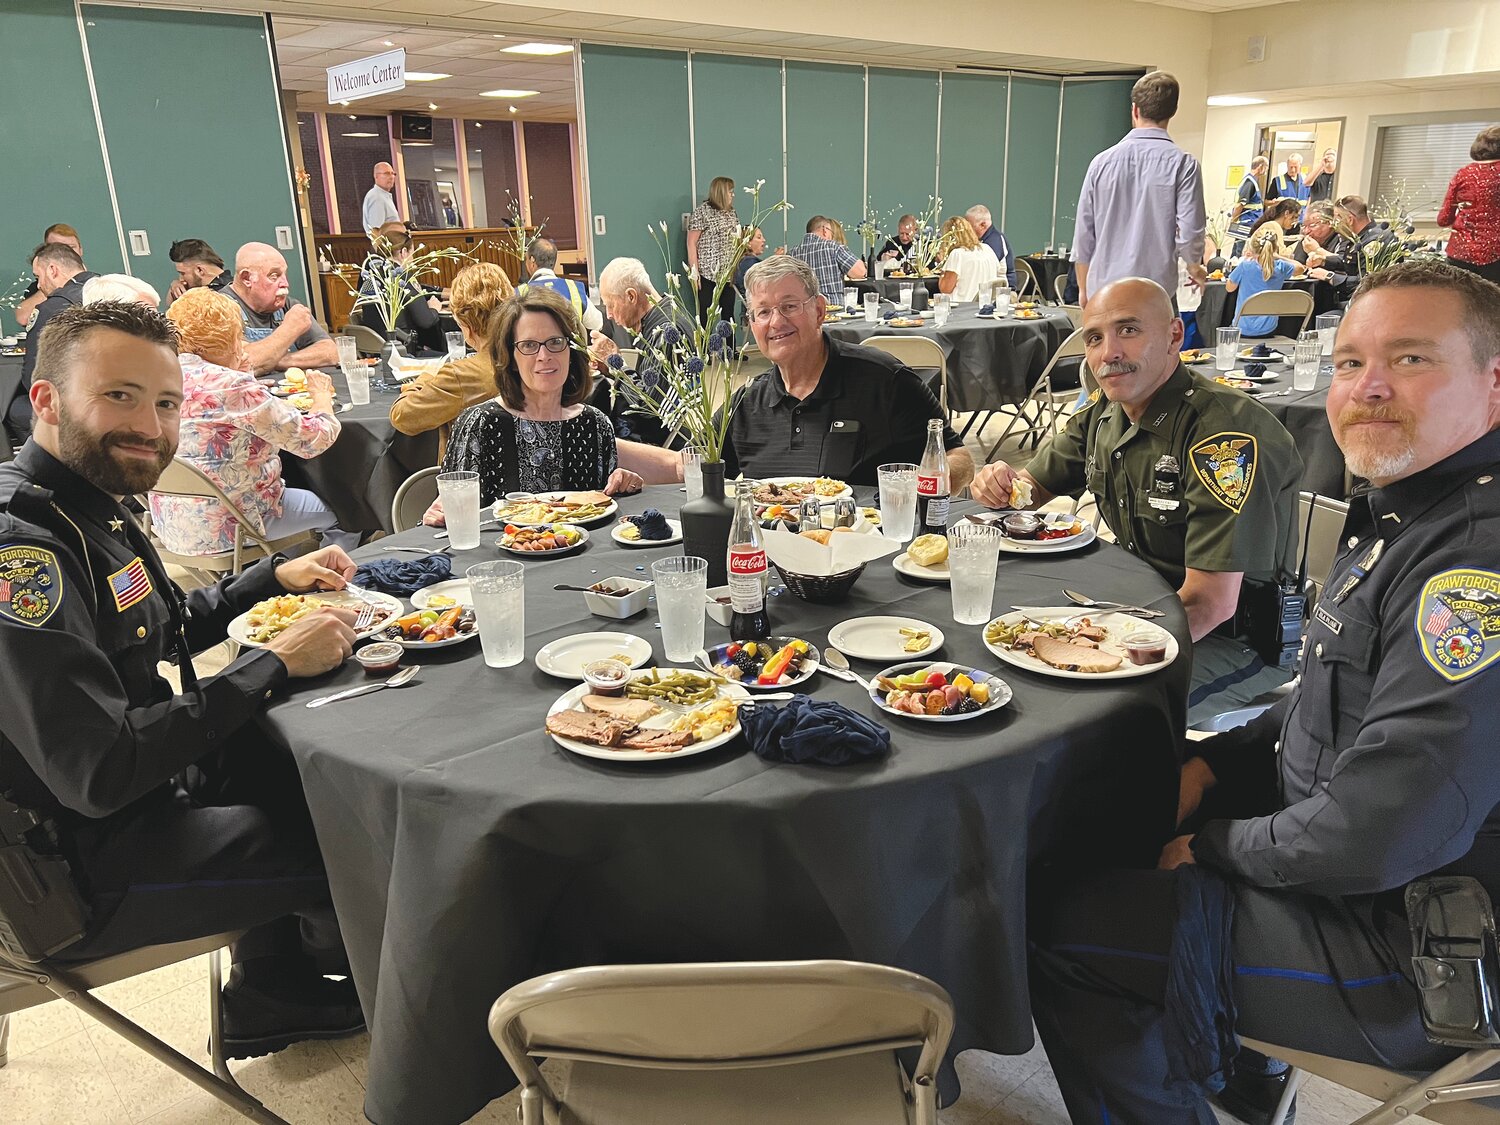 In recognition of Police Memorial Day, First Baptist Church of Crawfordsville hosted a banquet in honor of our local law enforcement on May 15. The featured guest speaker was retired minister Mike Whitaker. The theme of his address was “Thank you from a grateful citizen.”